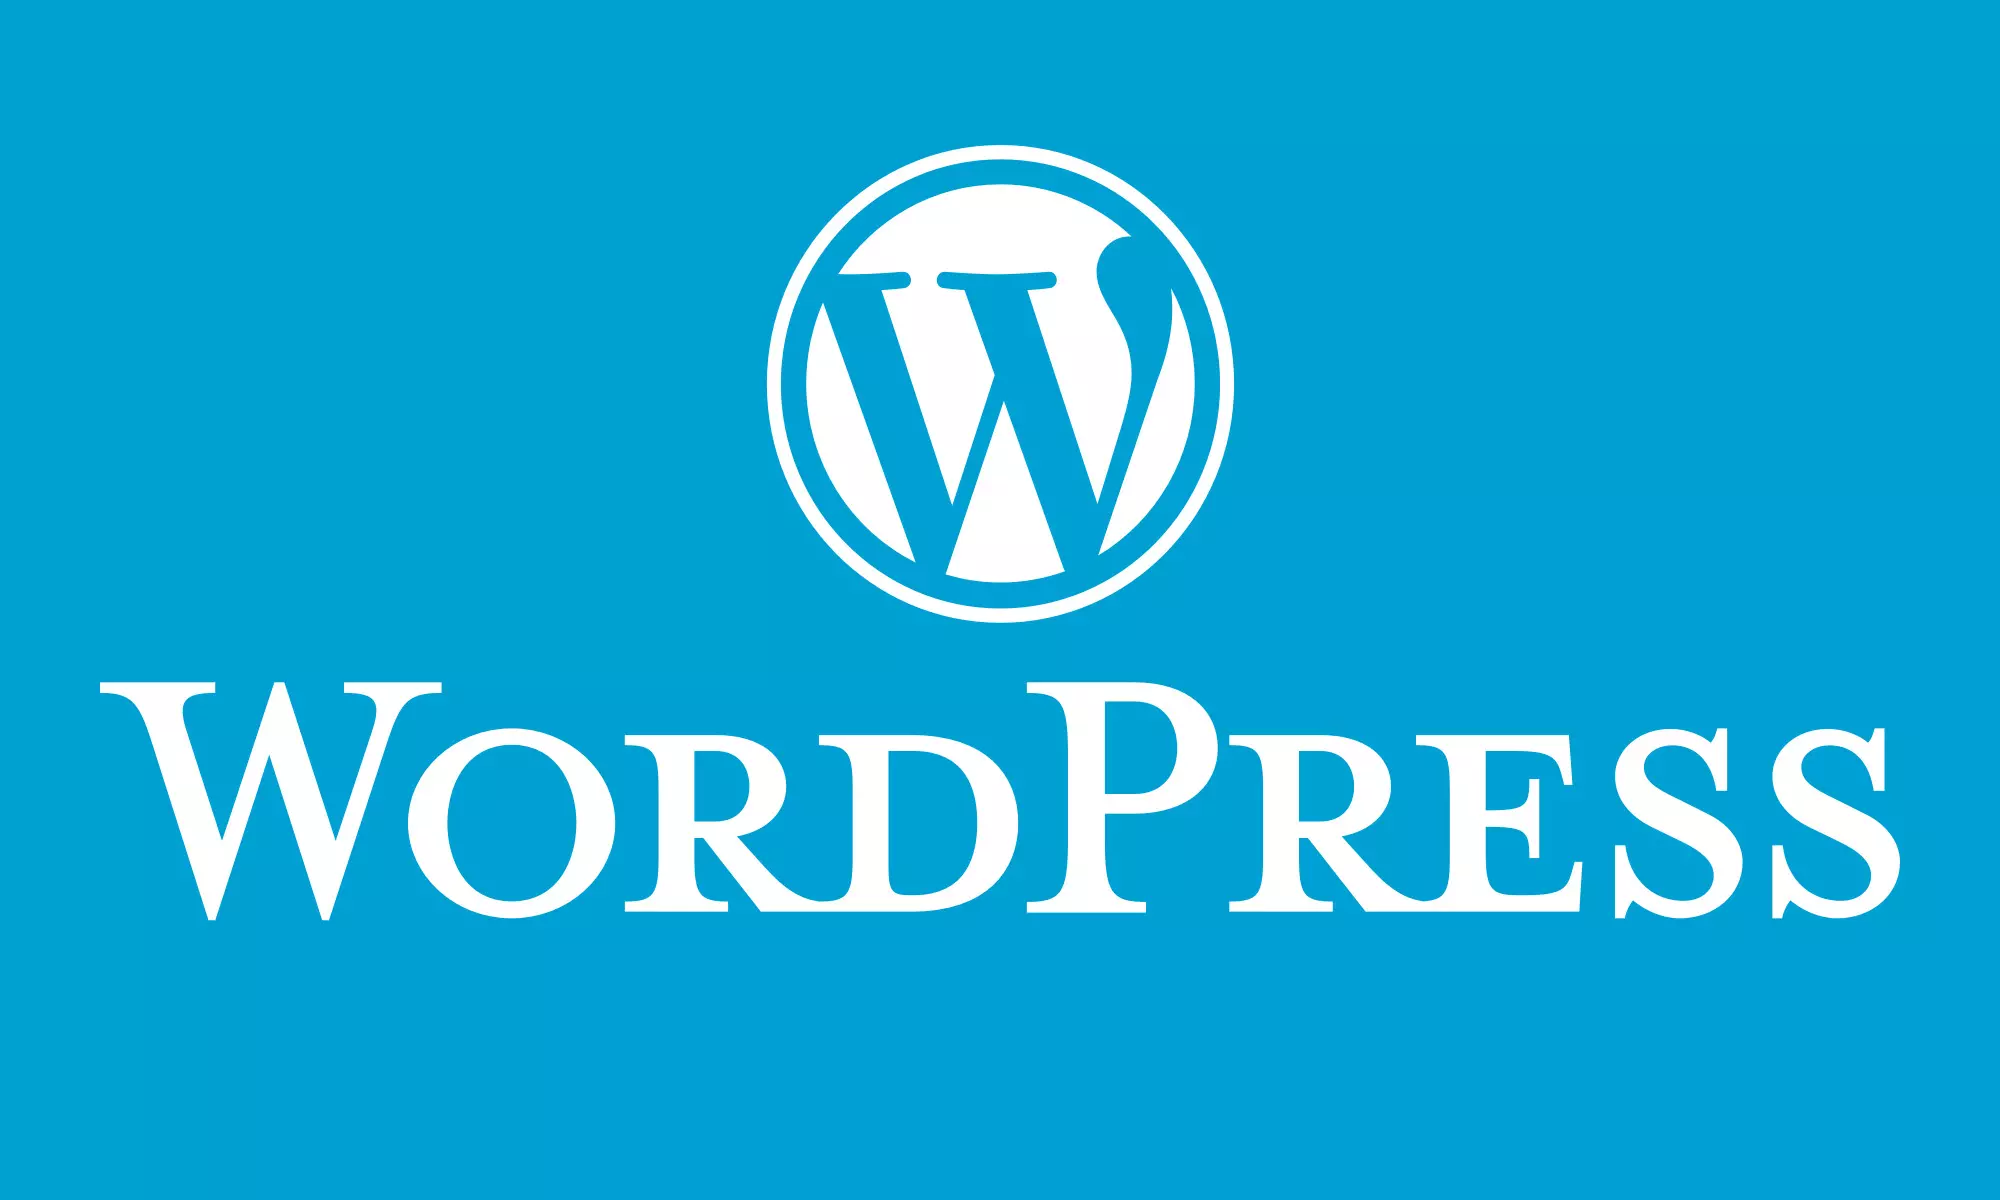 Apple apologizes for cutting off updates to WordPress app; Restores all updates